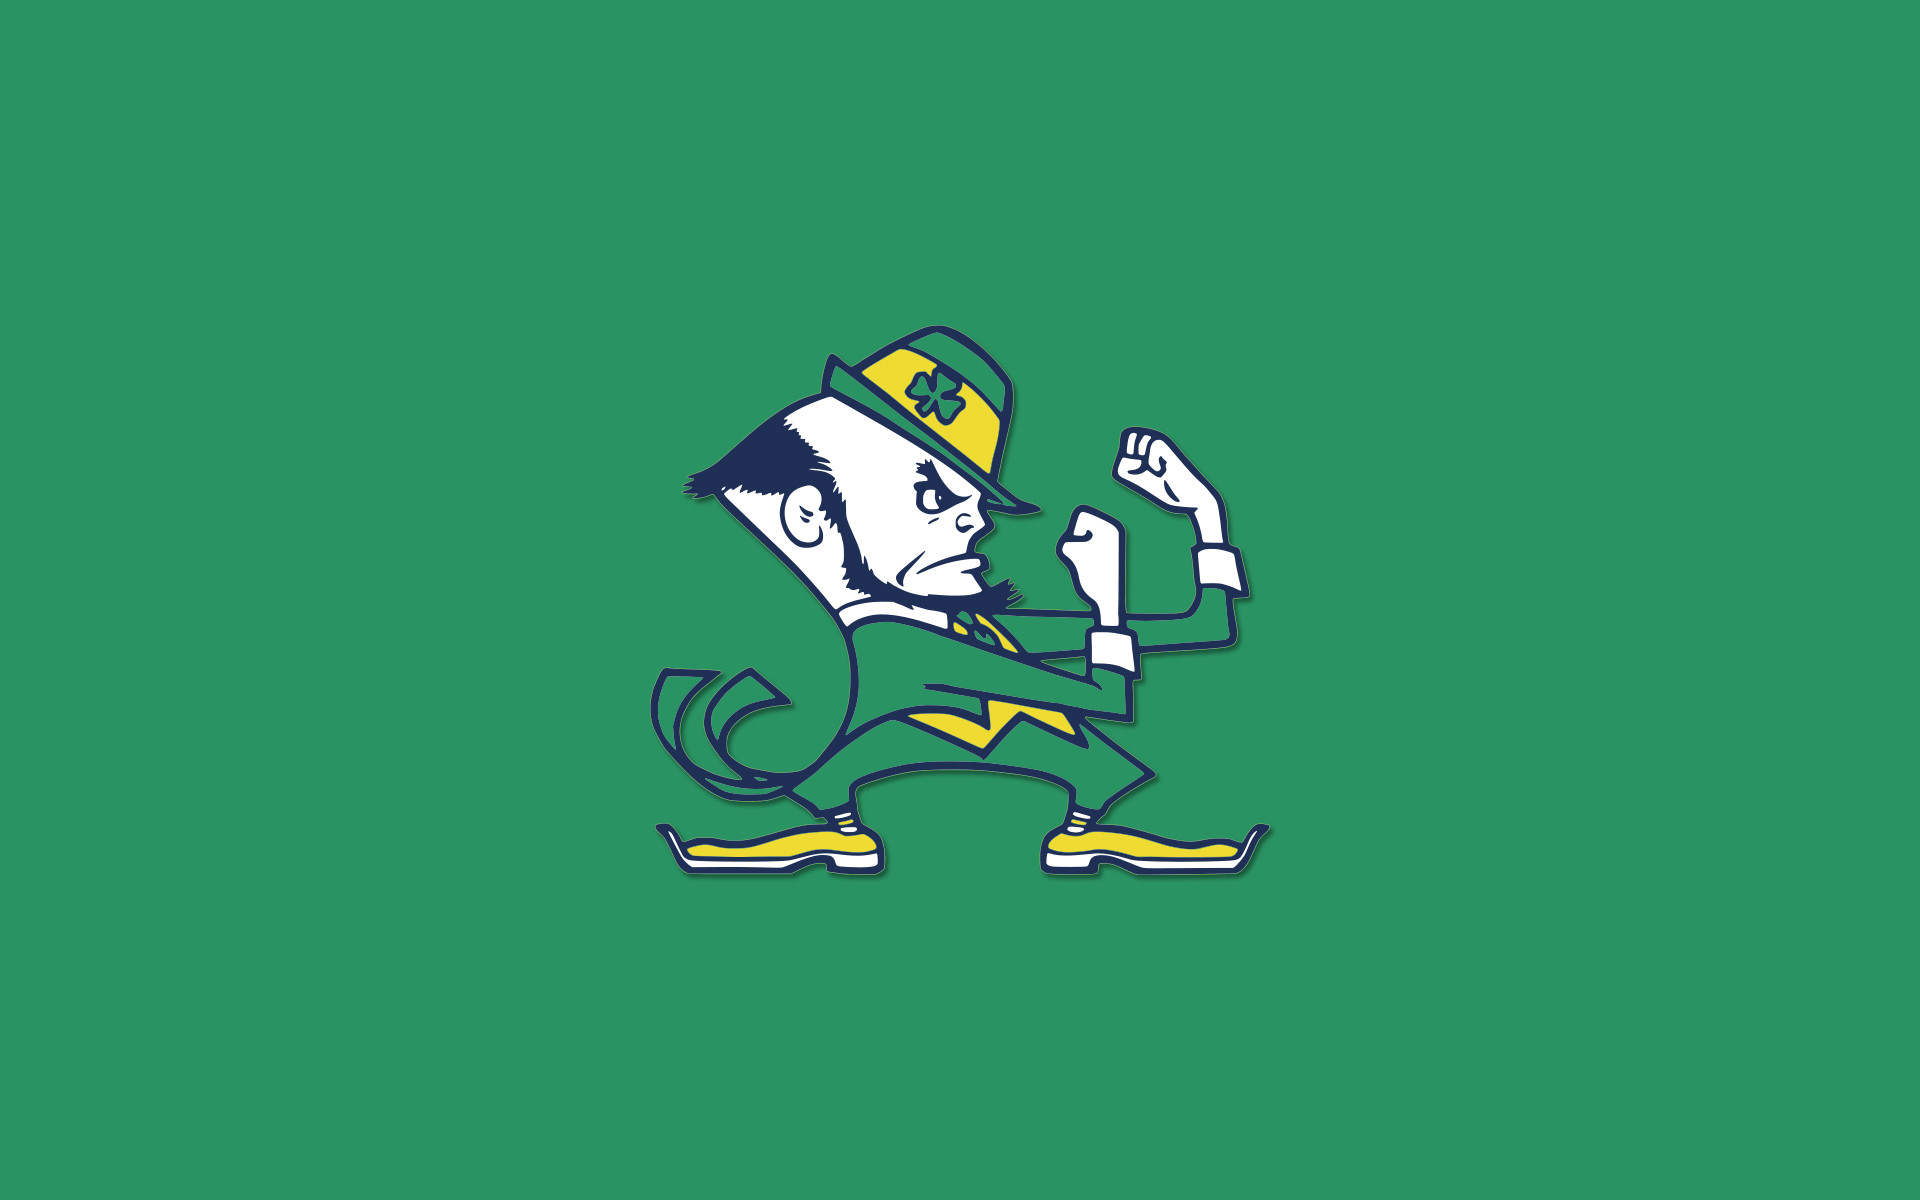 Download wallpapers Notre Dame Fighting Irish American football team blue  background Notre Dame Fighting Irish logo grunge art NCAA American  football USA Notre Dame Fighting Irish emblem for desktop free Pictures  for